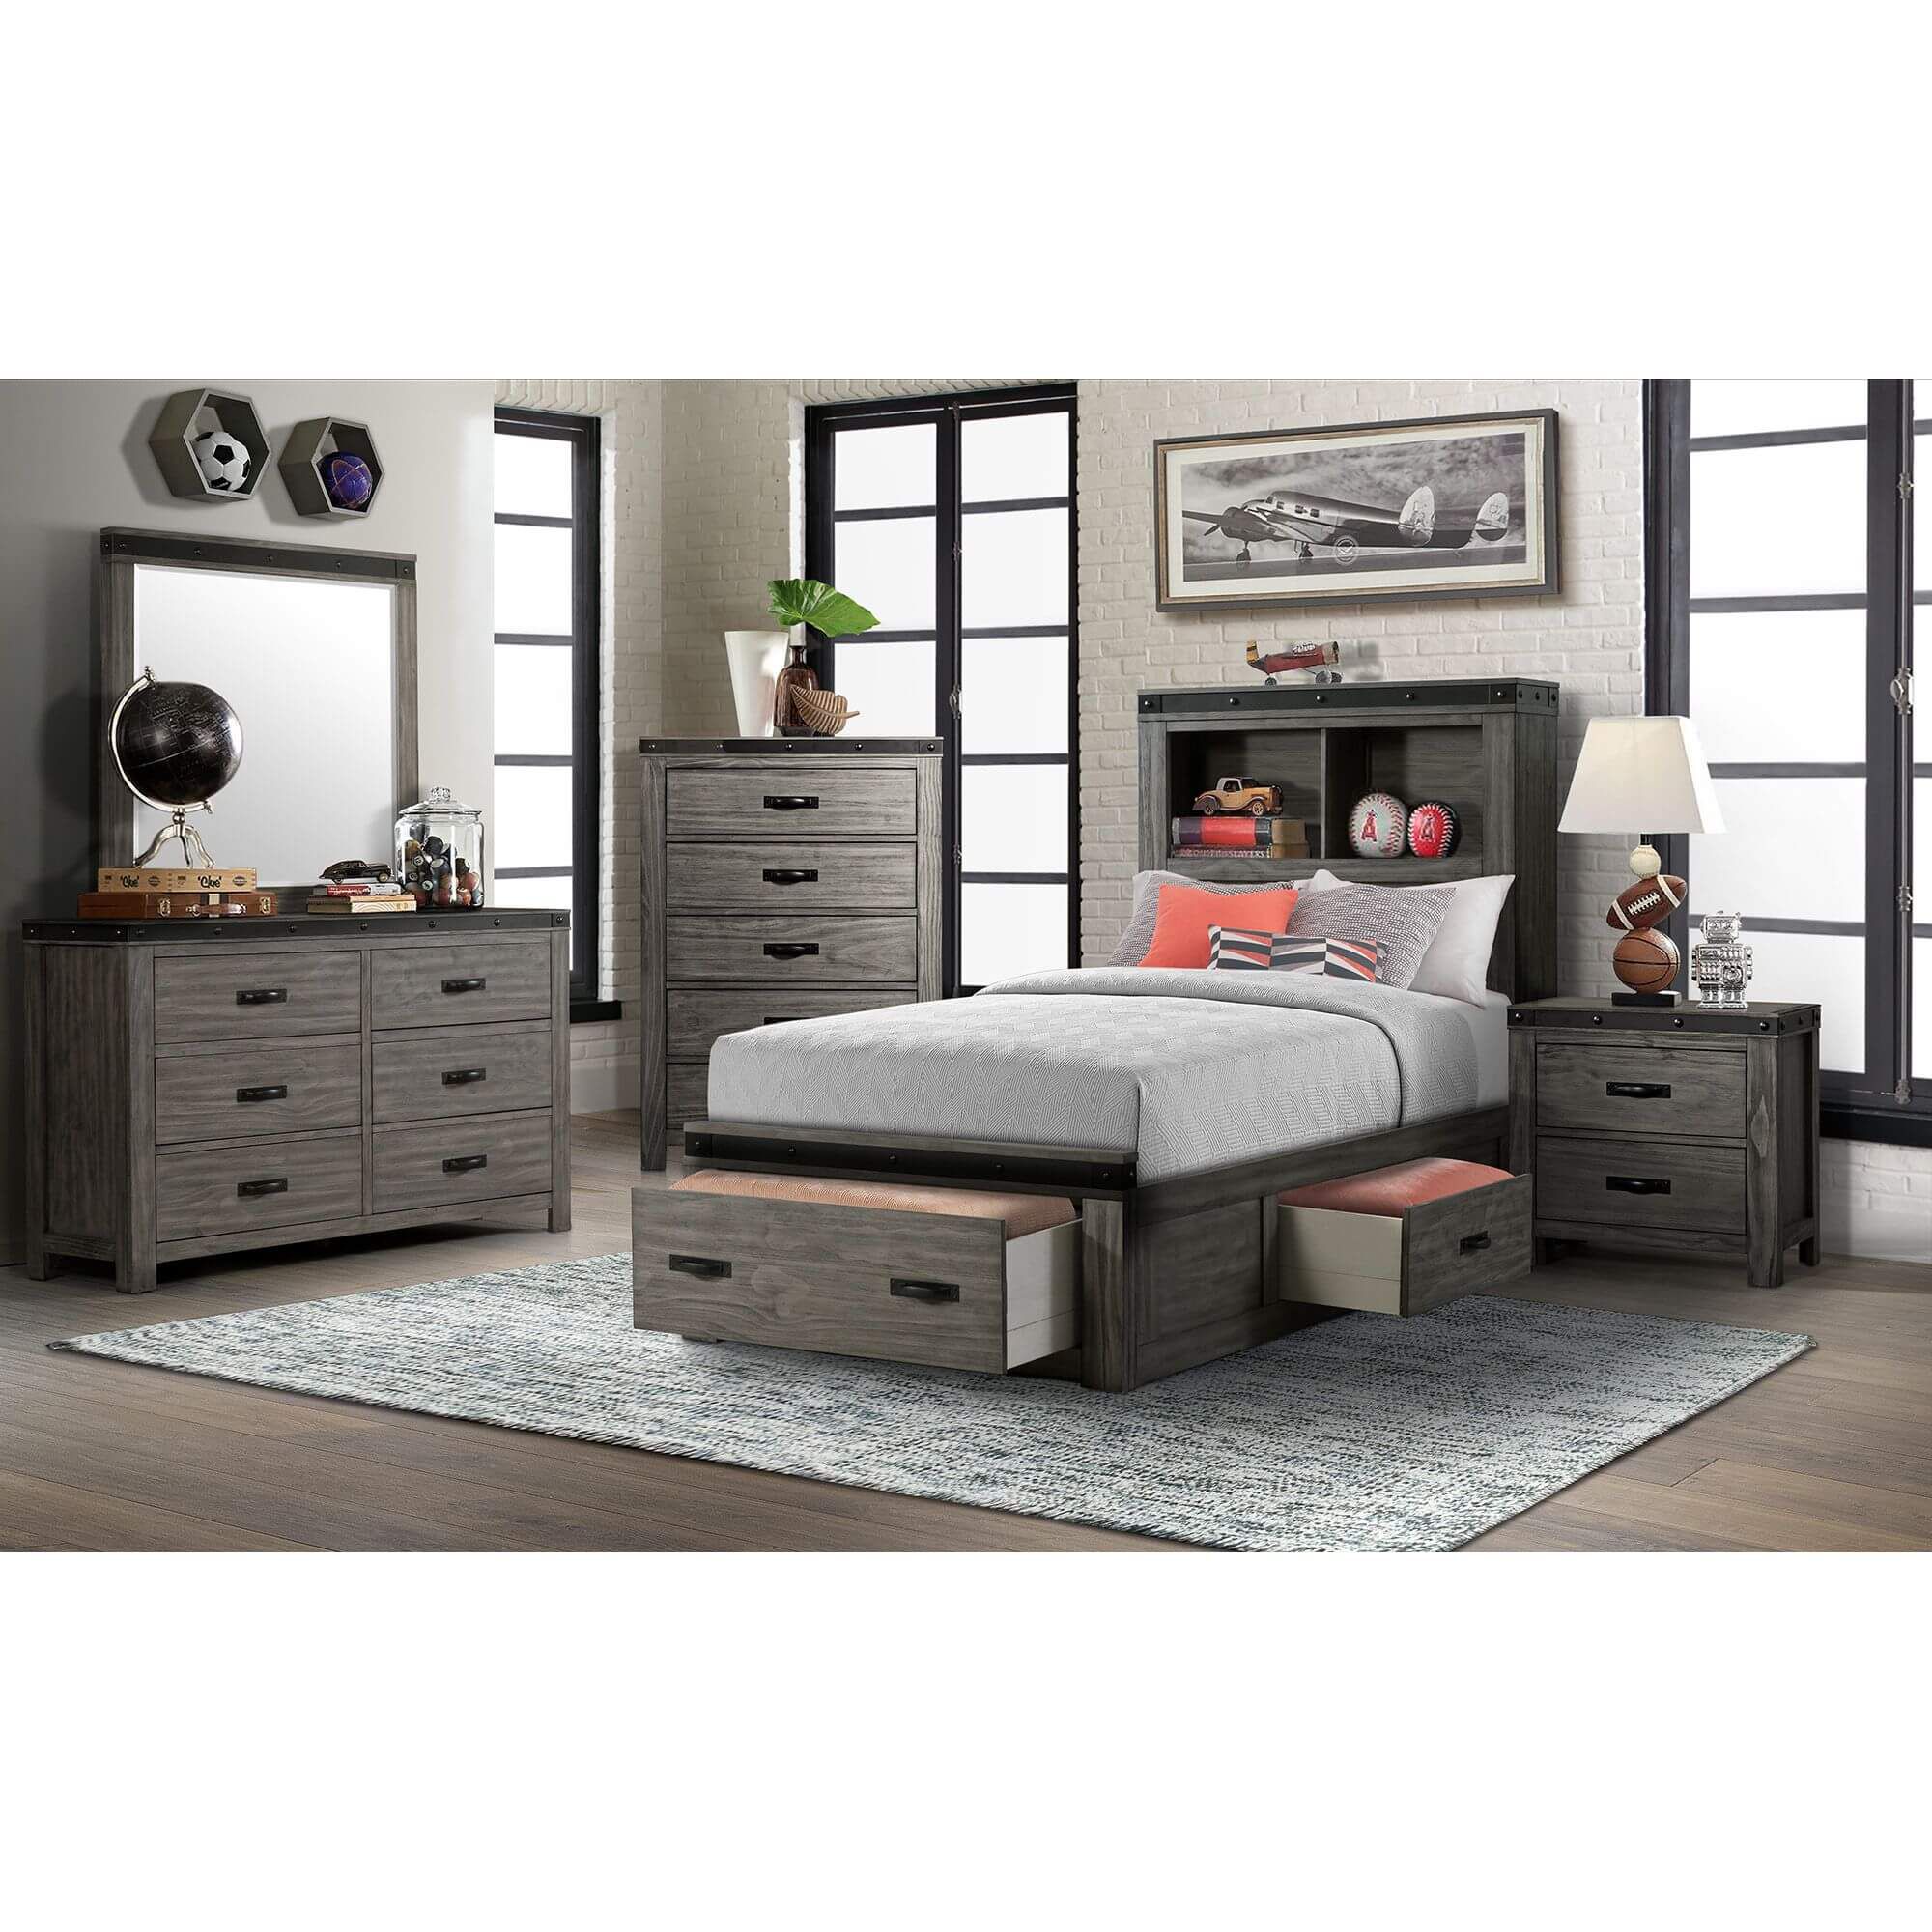 boys twin bed set